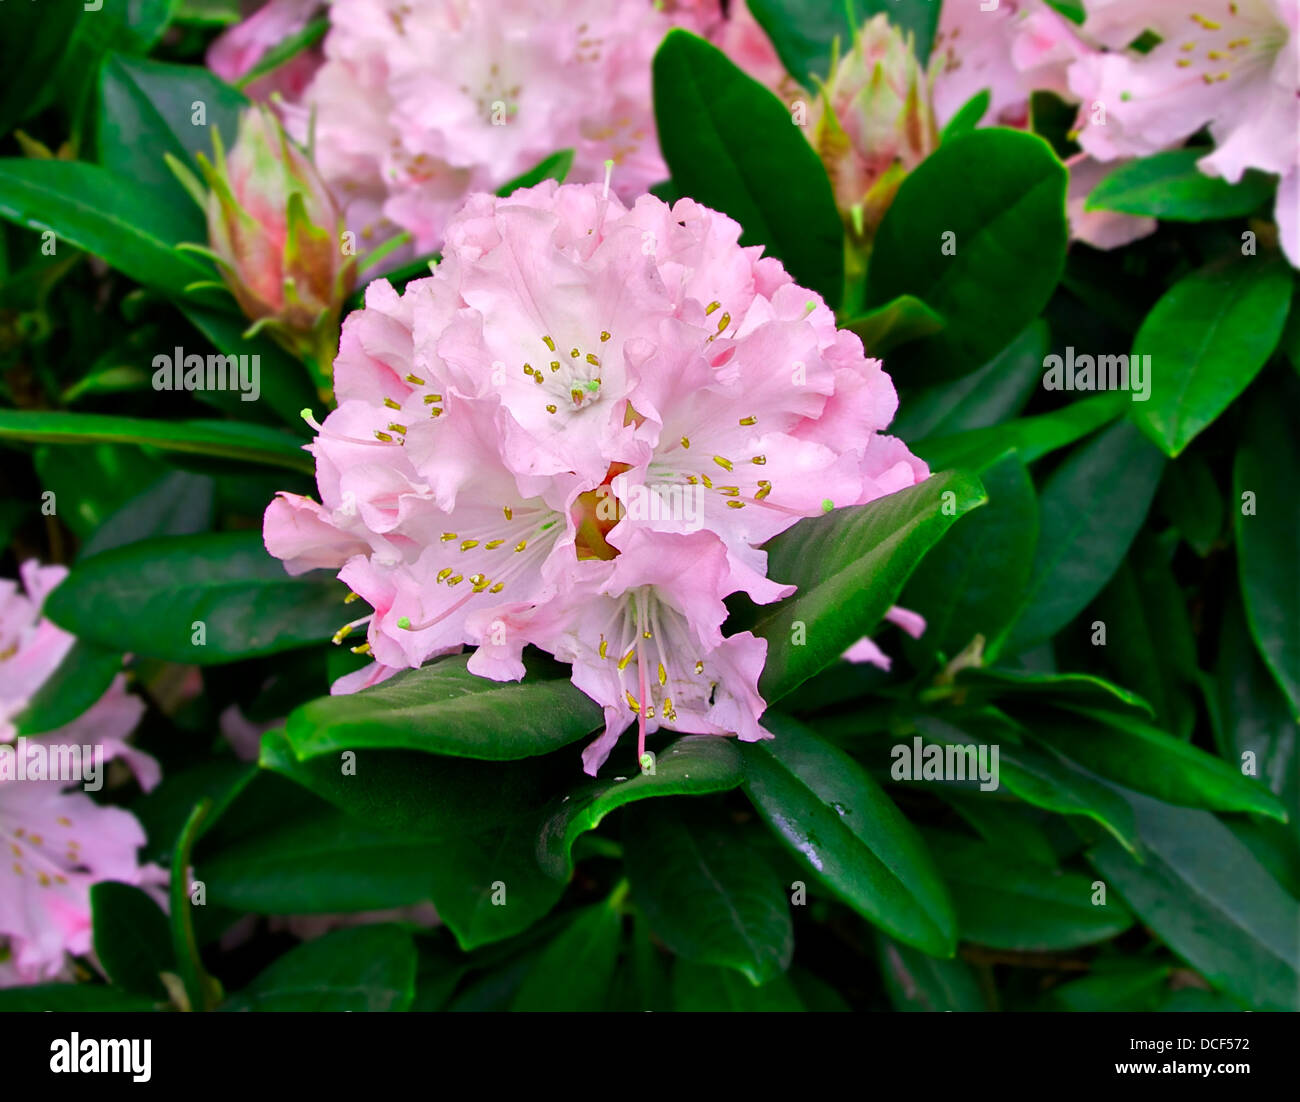 rhododendron cultivar. Stock Photo